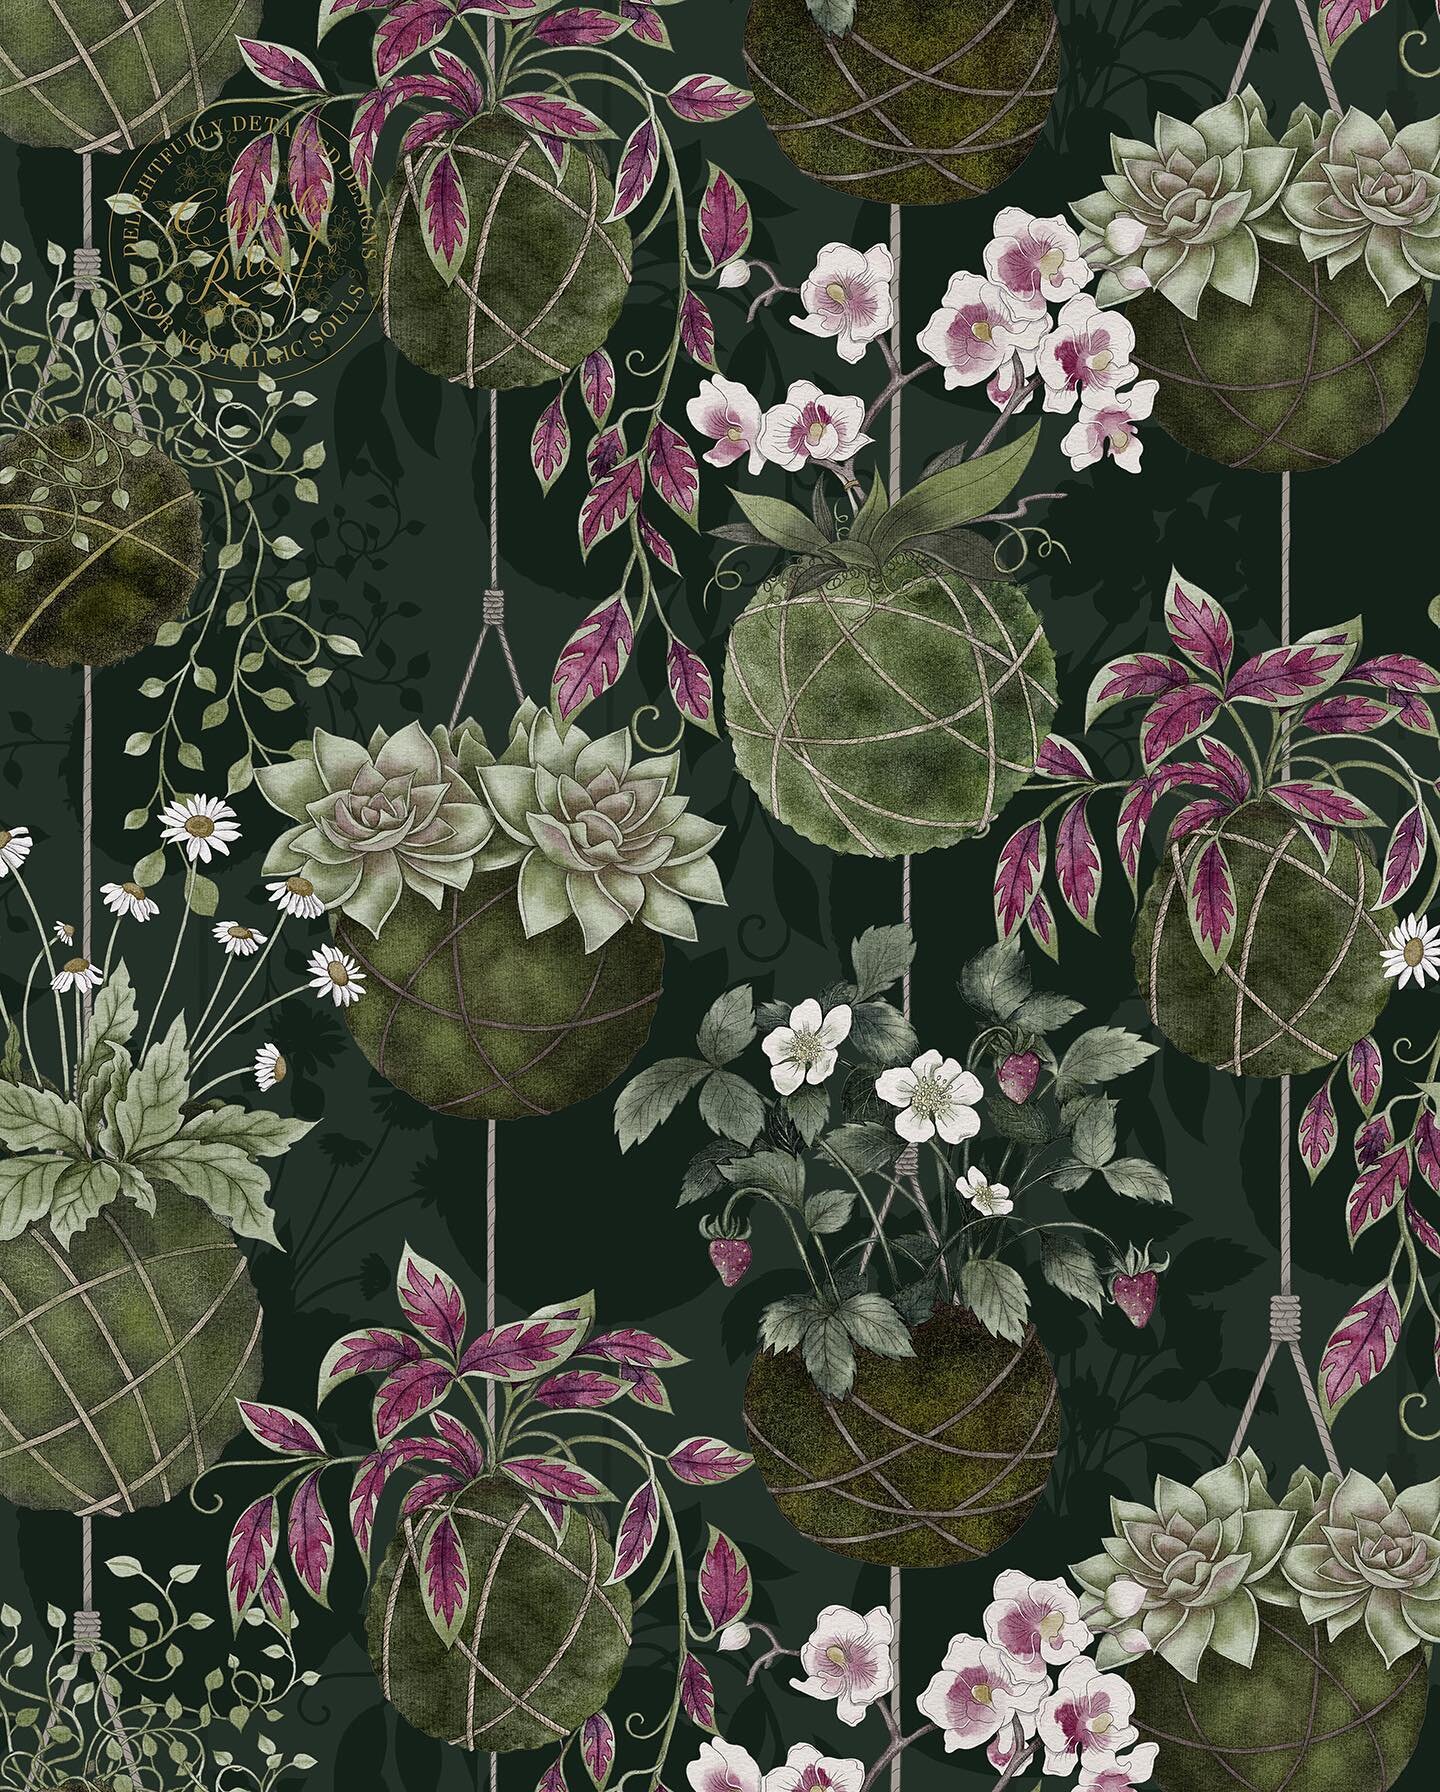 Happy Thursday, here is my entry for this week&rsquo;s @spoonflower challenge 💚MOSSES💚
I originally thought I would go down the moss covered secret garden route but when I came across &lsquo;Kokedama&rsquo; (Japanese moss balls) I was fascinated by